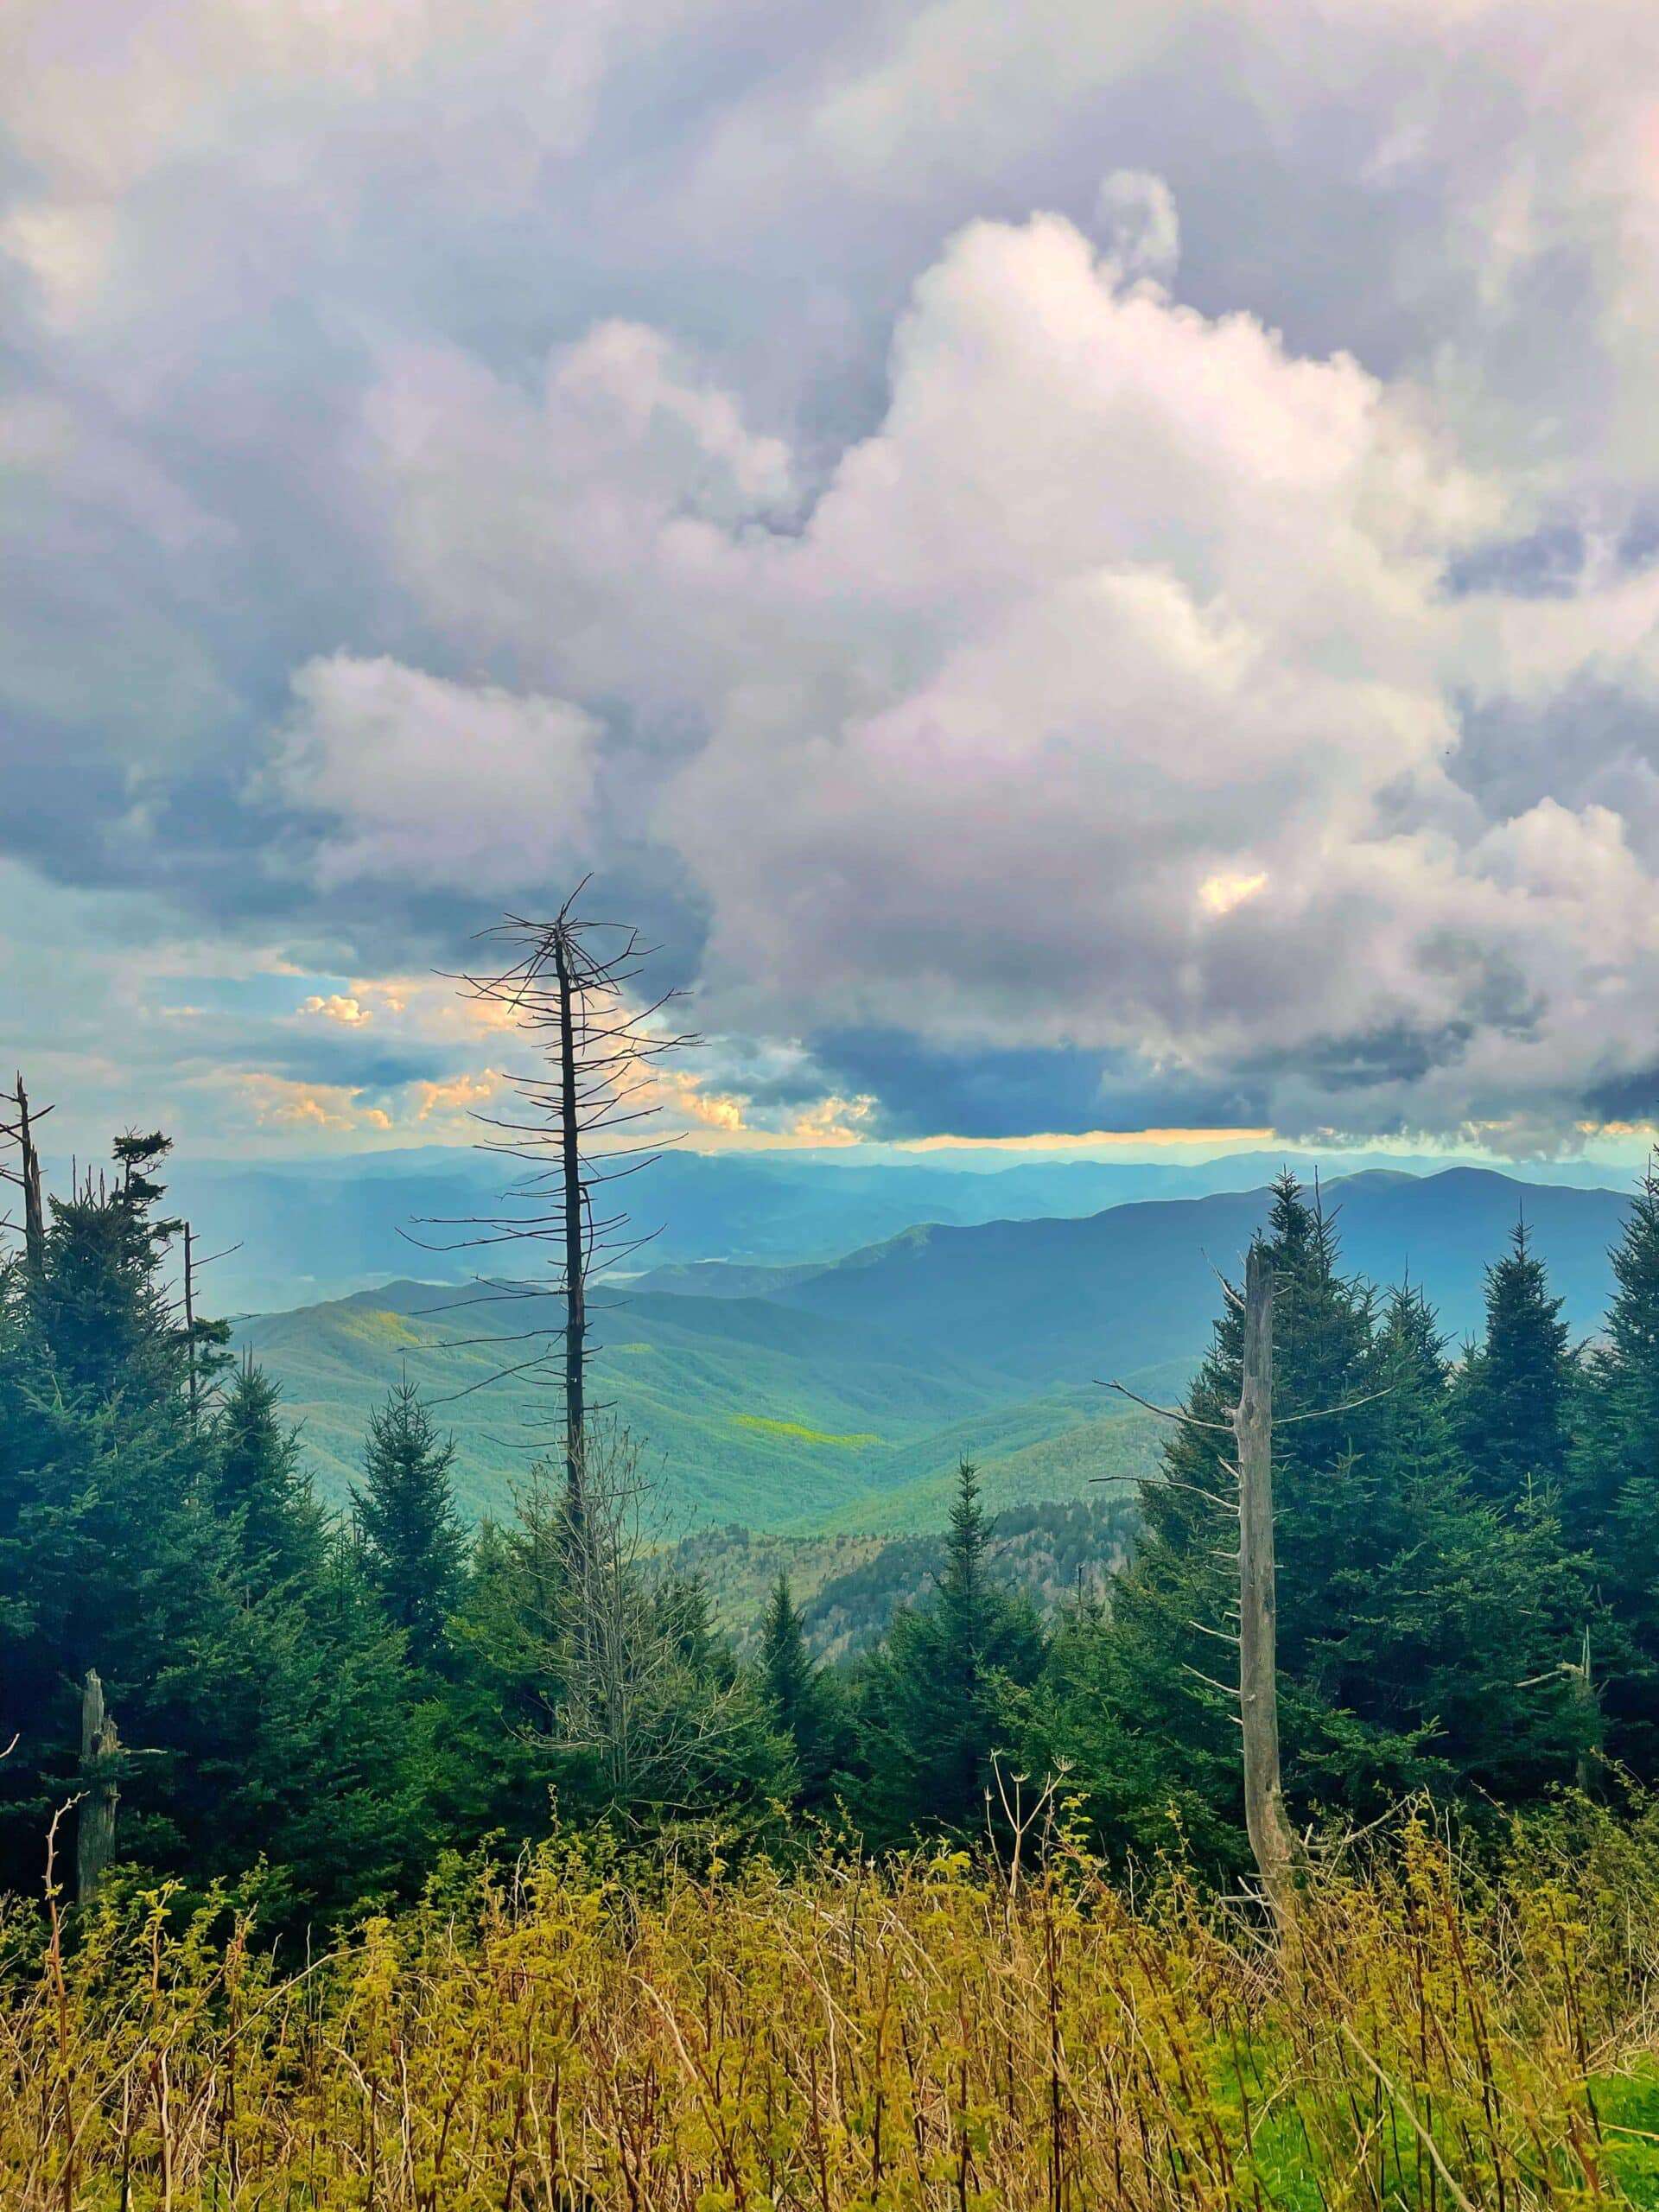 The parking lot at clingmans dome in the smokies